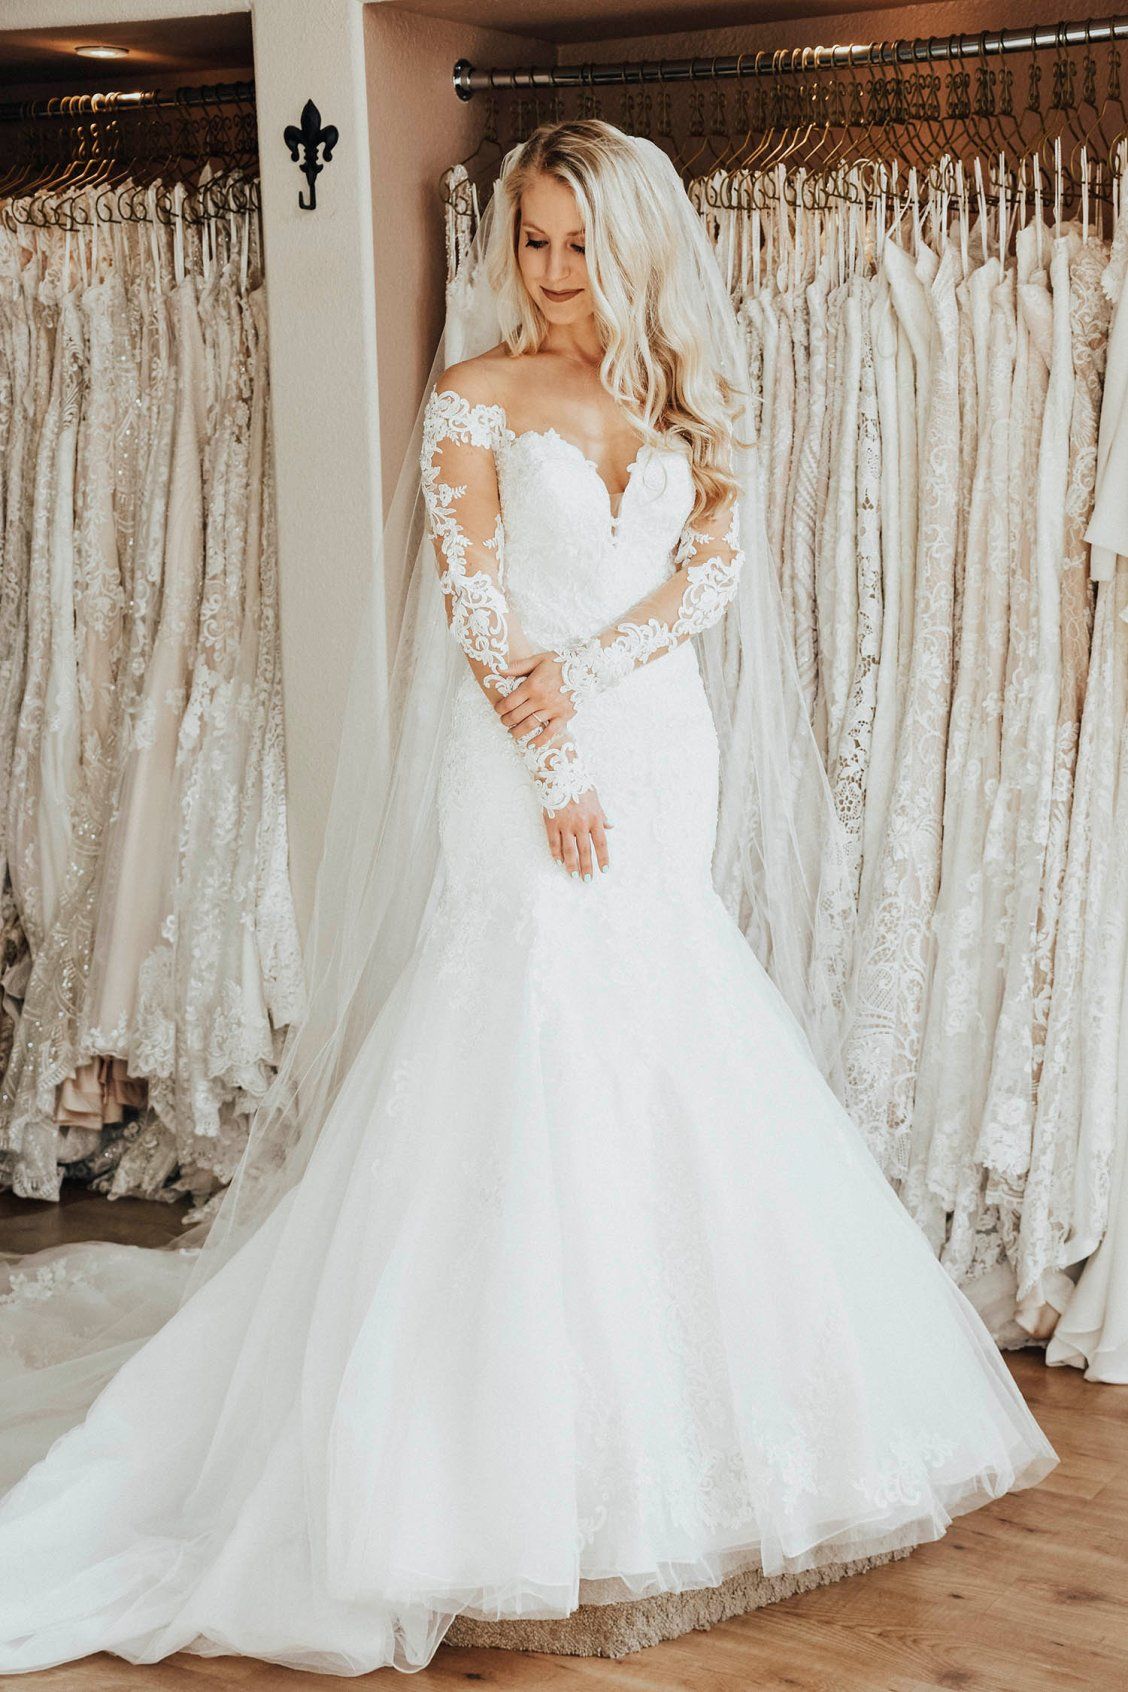 How to Find to Perfect Wedding Dress